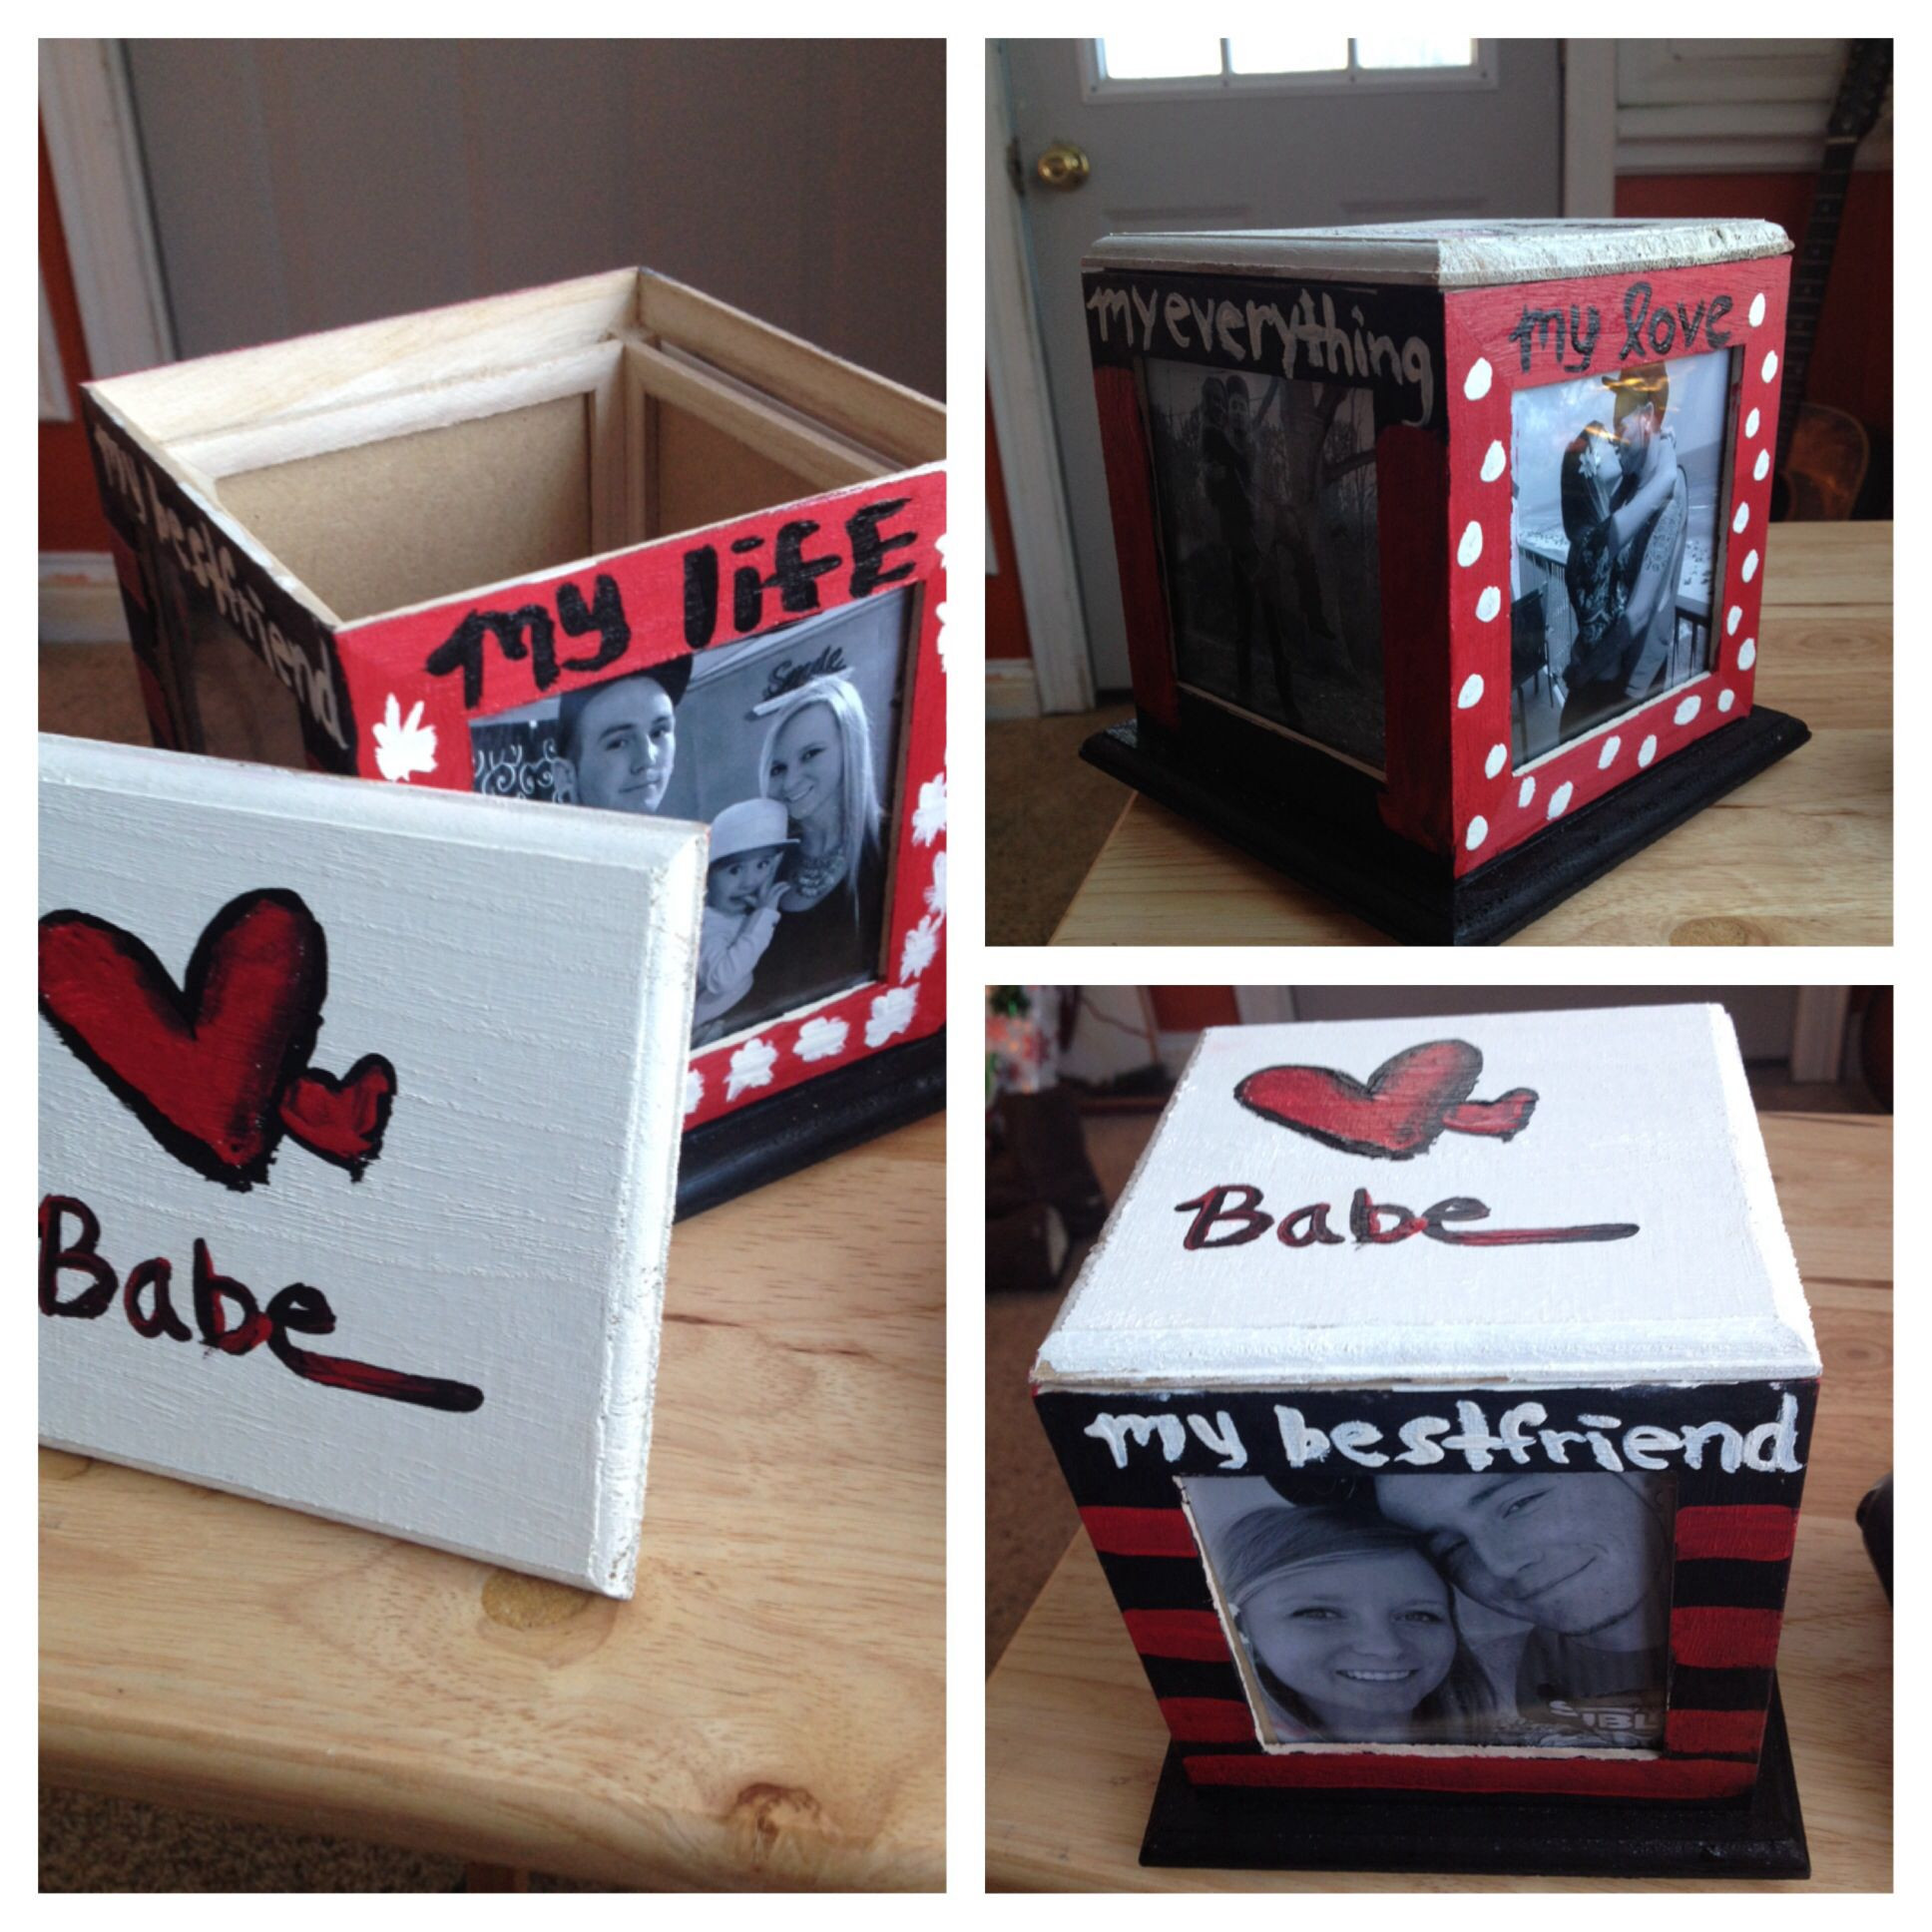 Small Gift Ideas For Boyfriend
 Cheap DIY present for boyfriend made this for Dan for